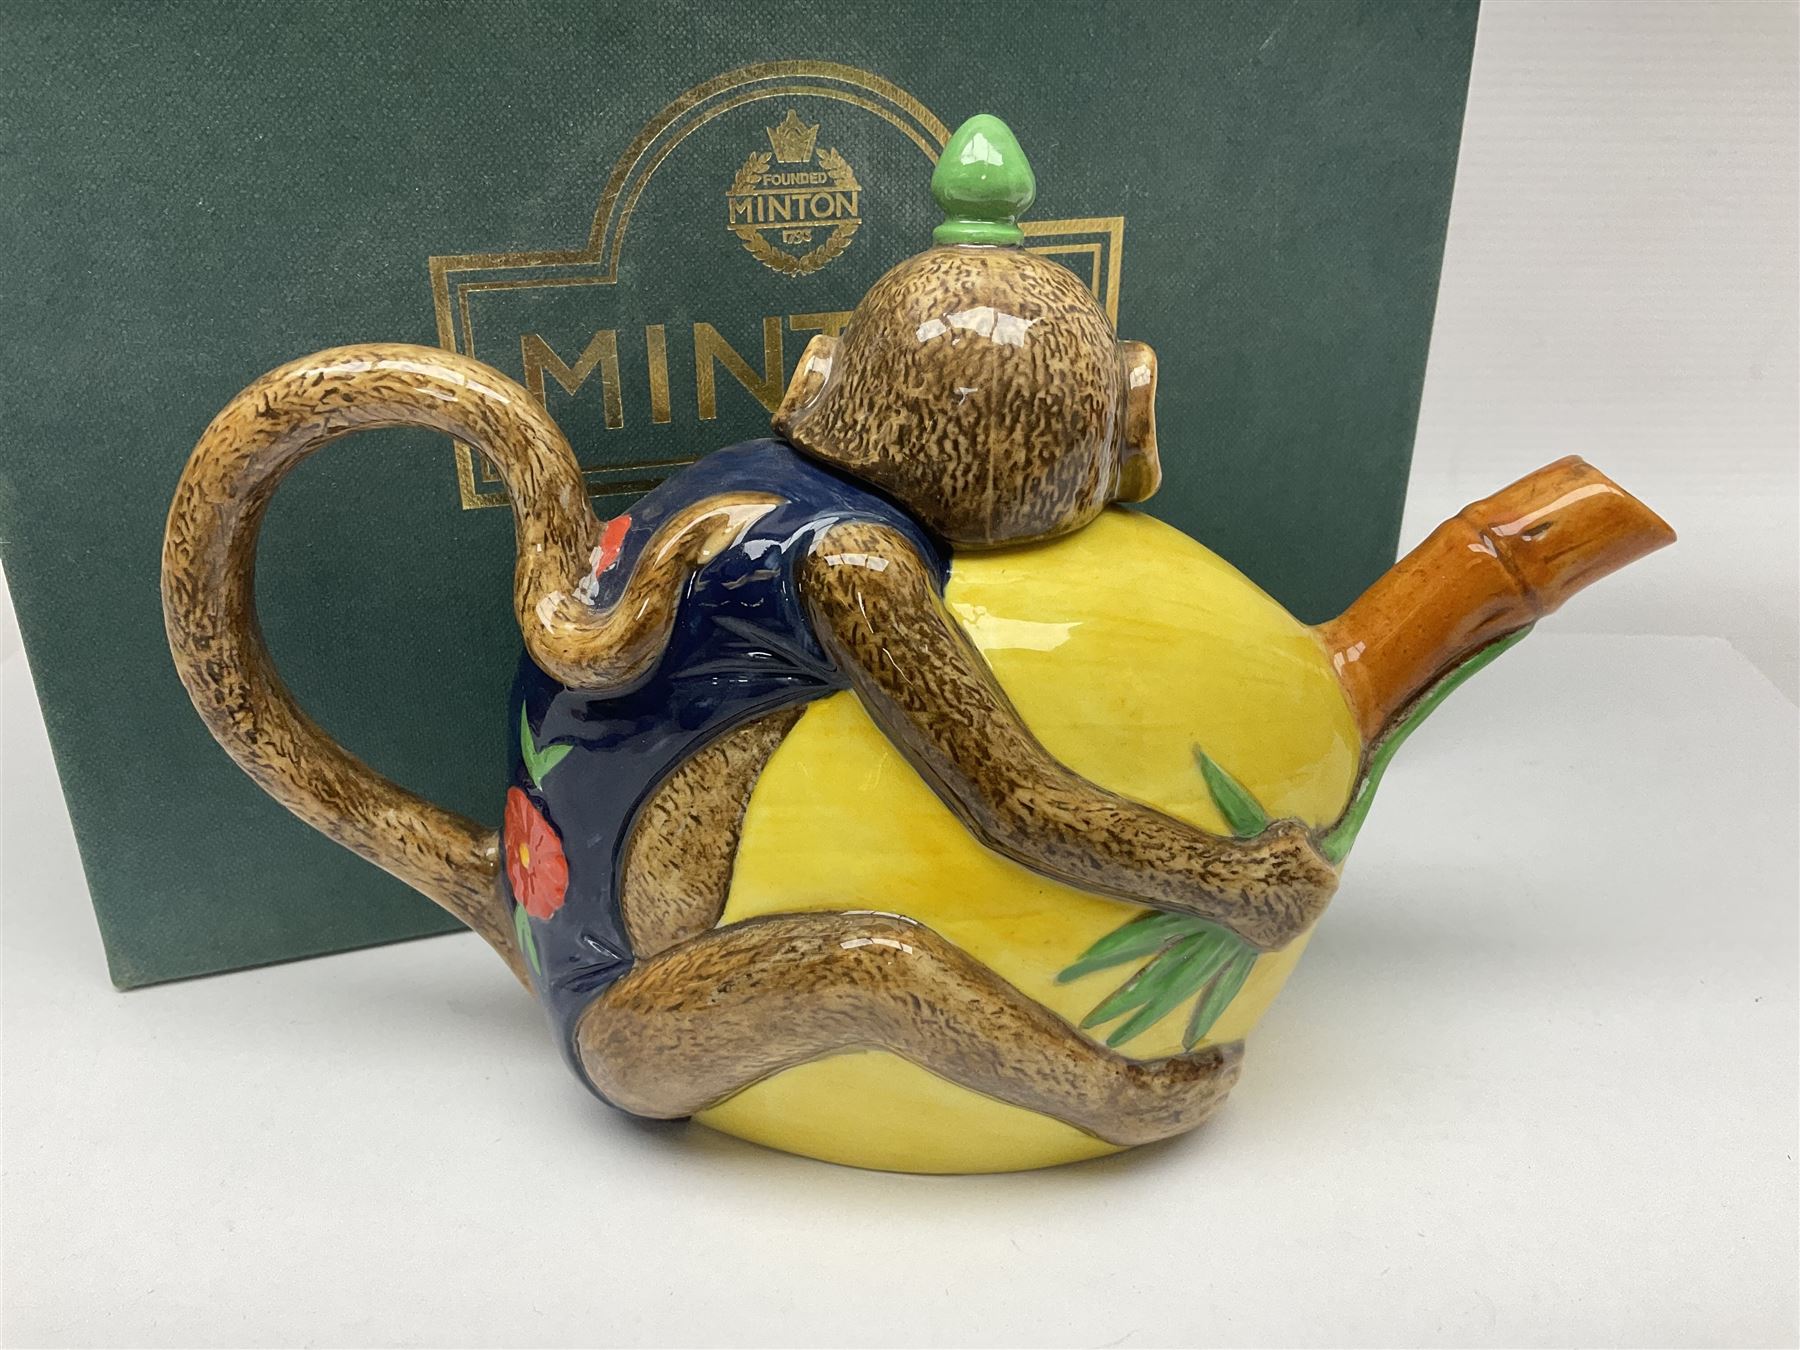 Minton Archive collection monkey teapot - Image 5 of 9